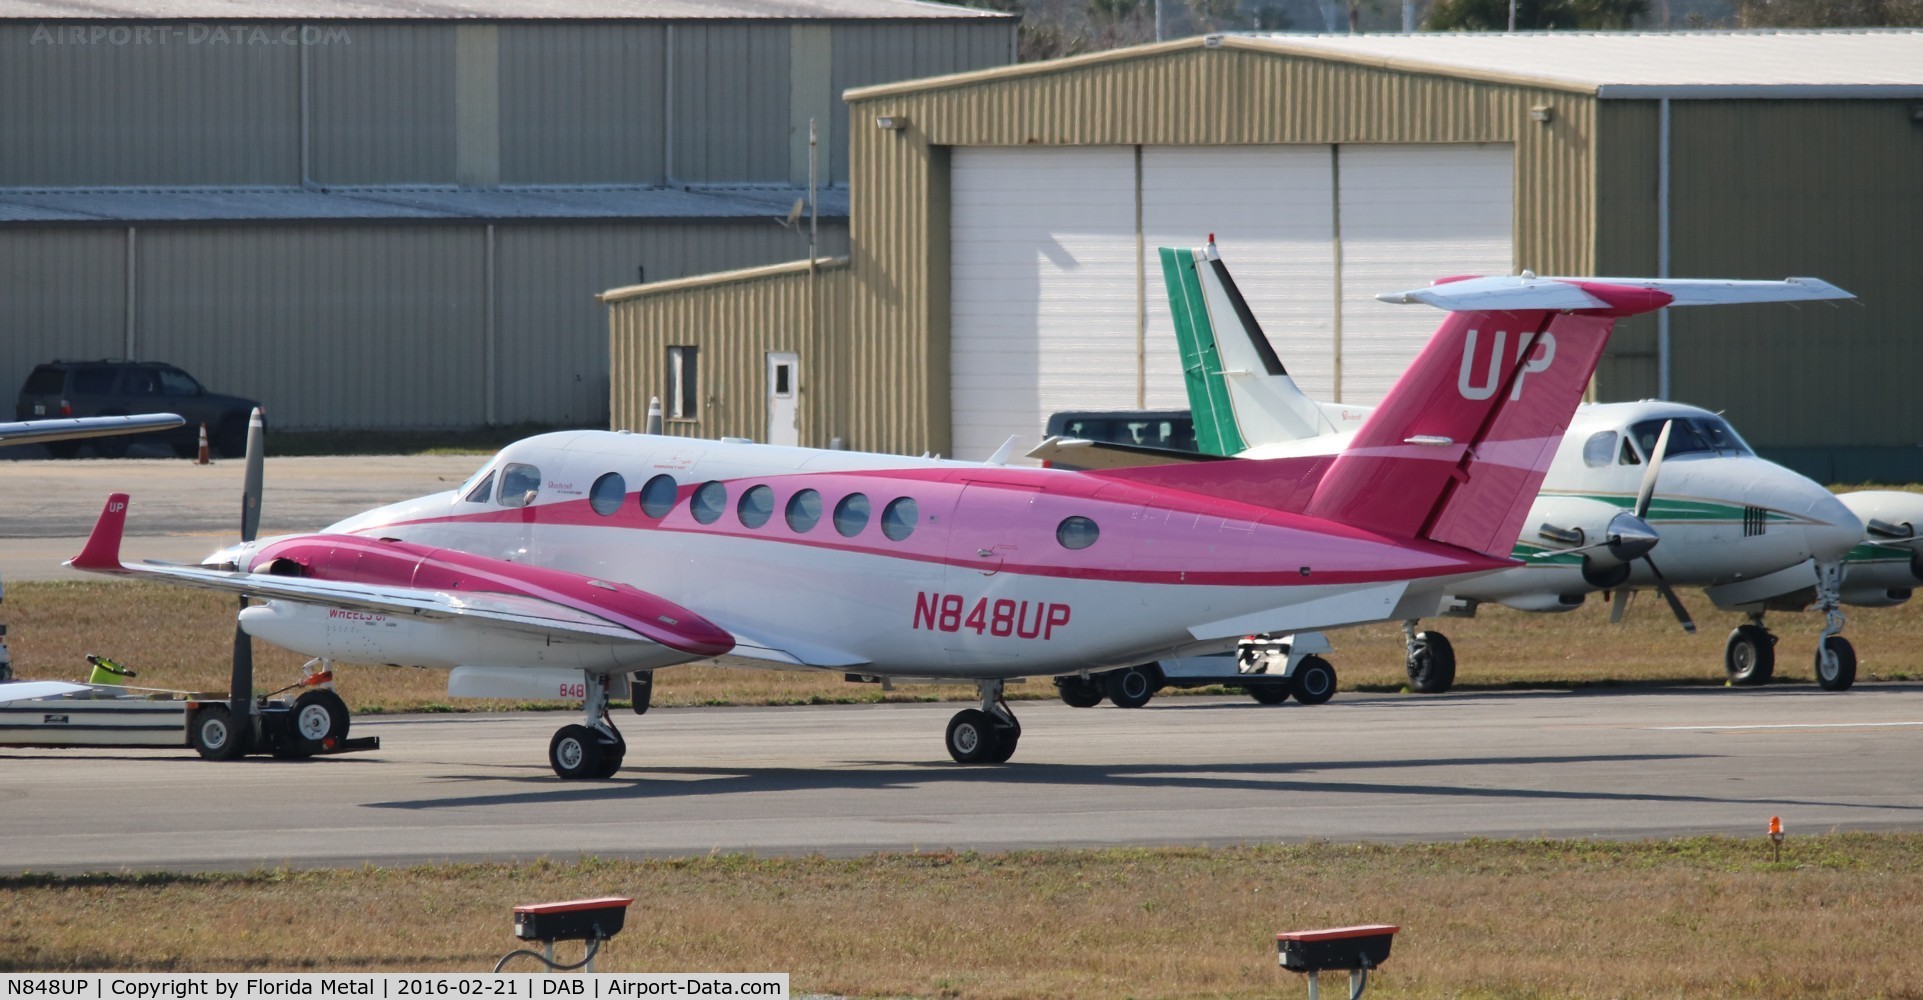 N848UP, 2015 Beechcraft 350 King Air C/N FL-1004, Wheels Up has a special painted Breast Cancer Awareness plane in pink. They are also coming out with an aqua colored one for Ovarian Cancer soon